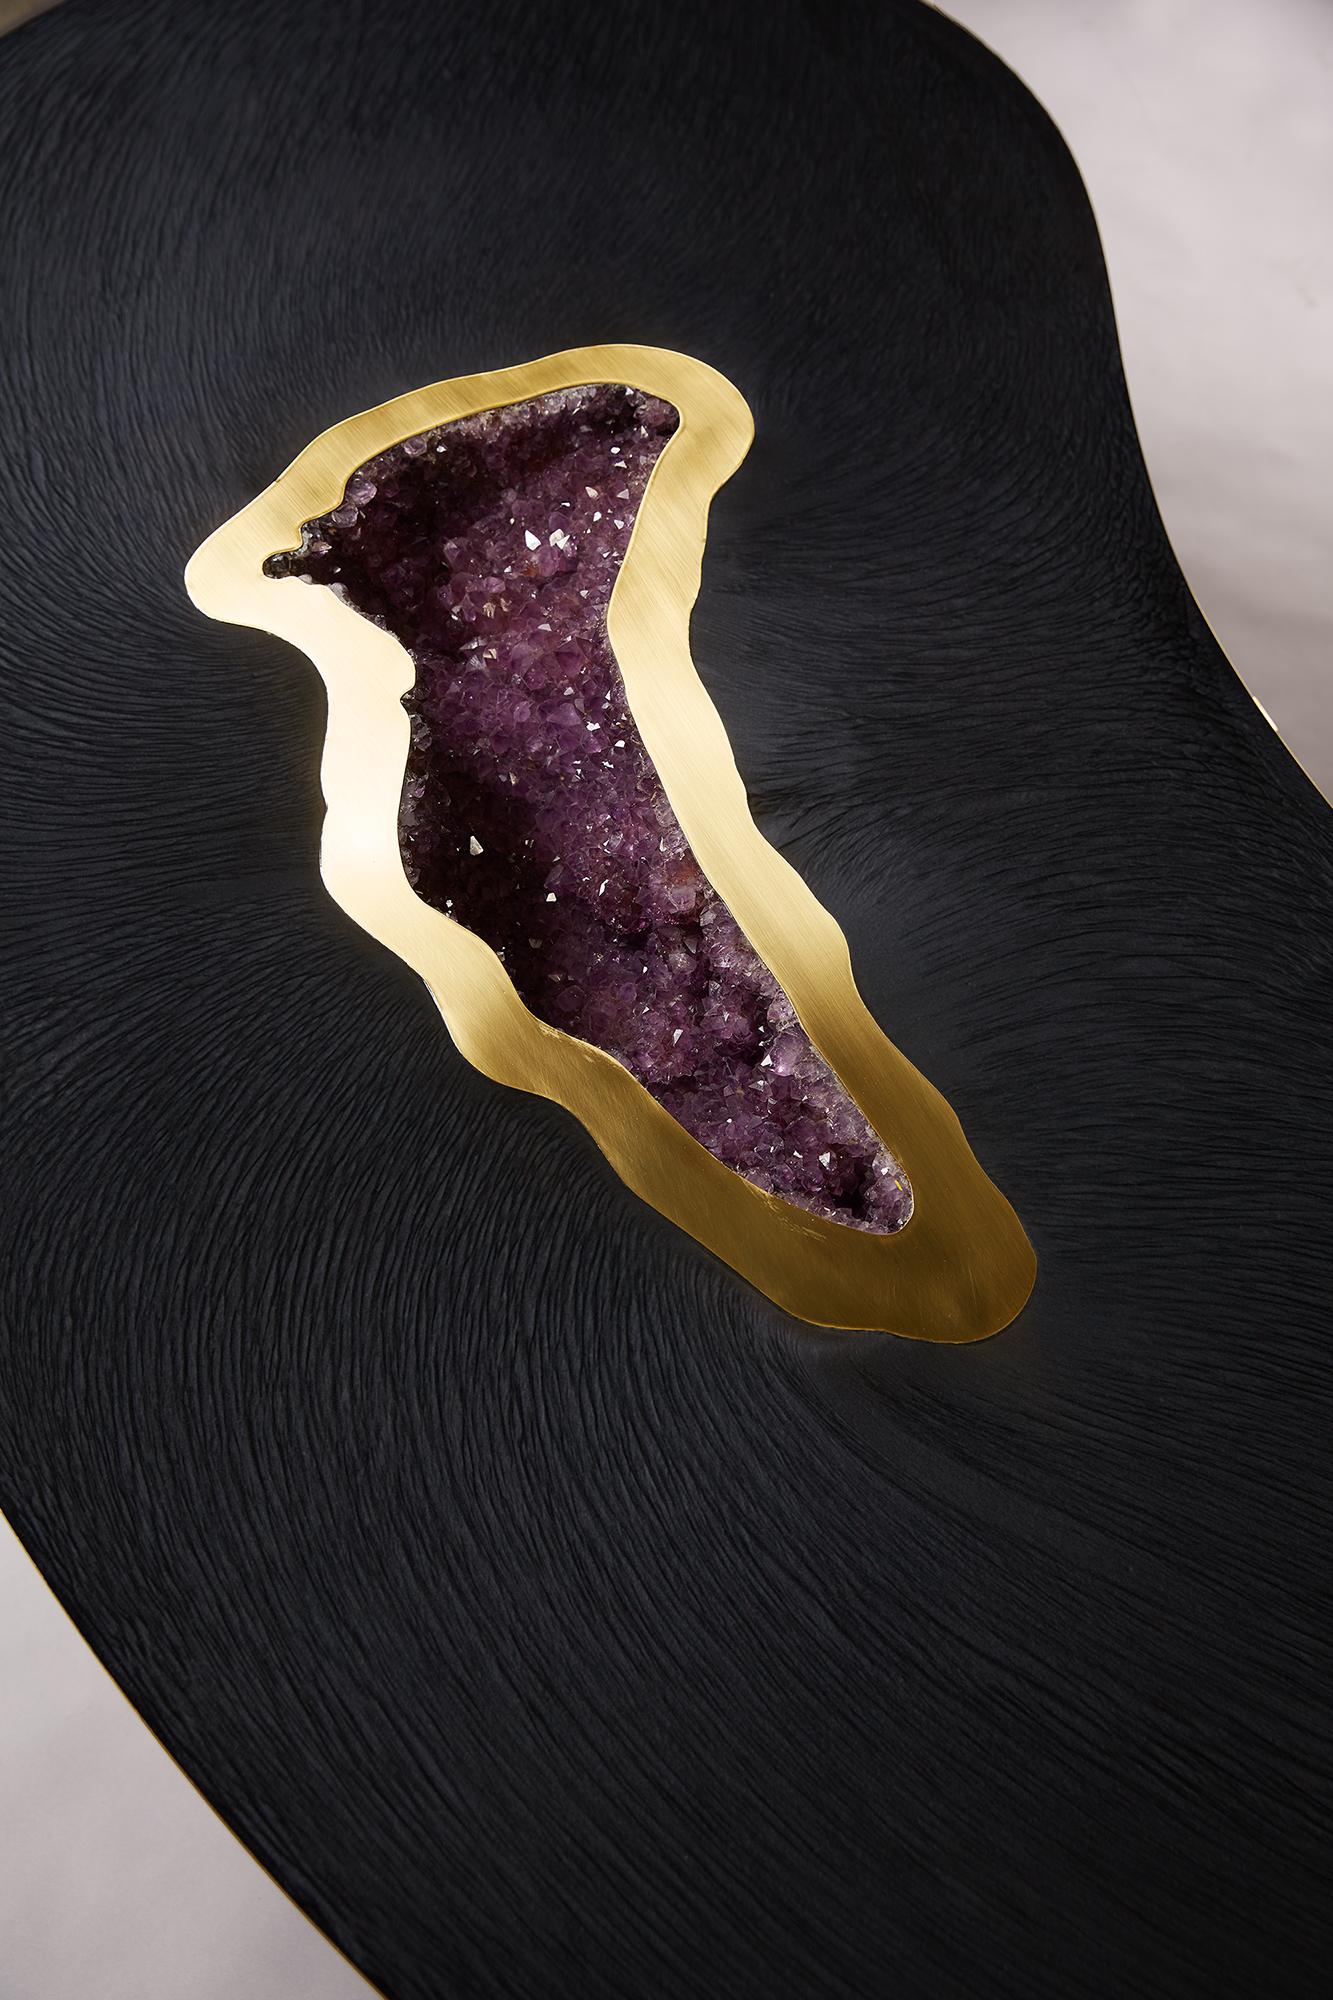 American Kidney Shaped Amethyst Geode and Resin Coffee Table